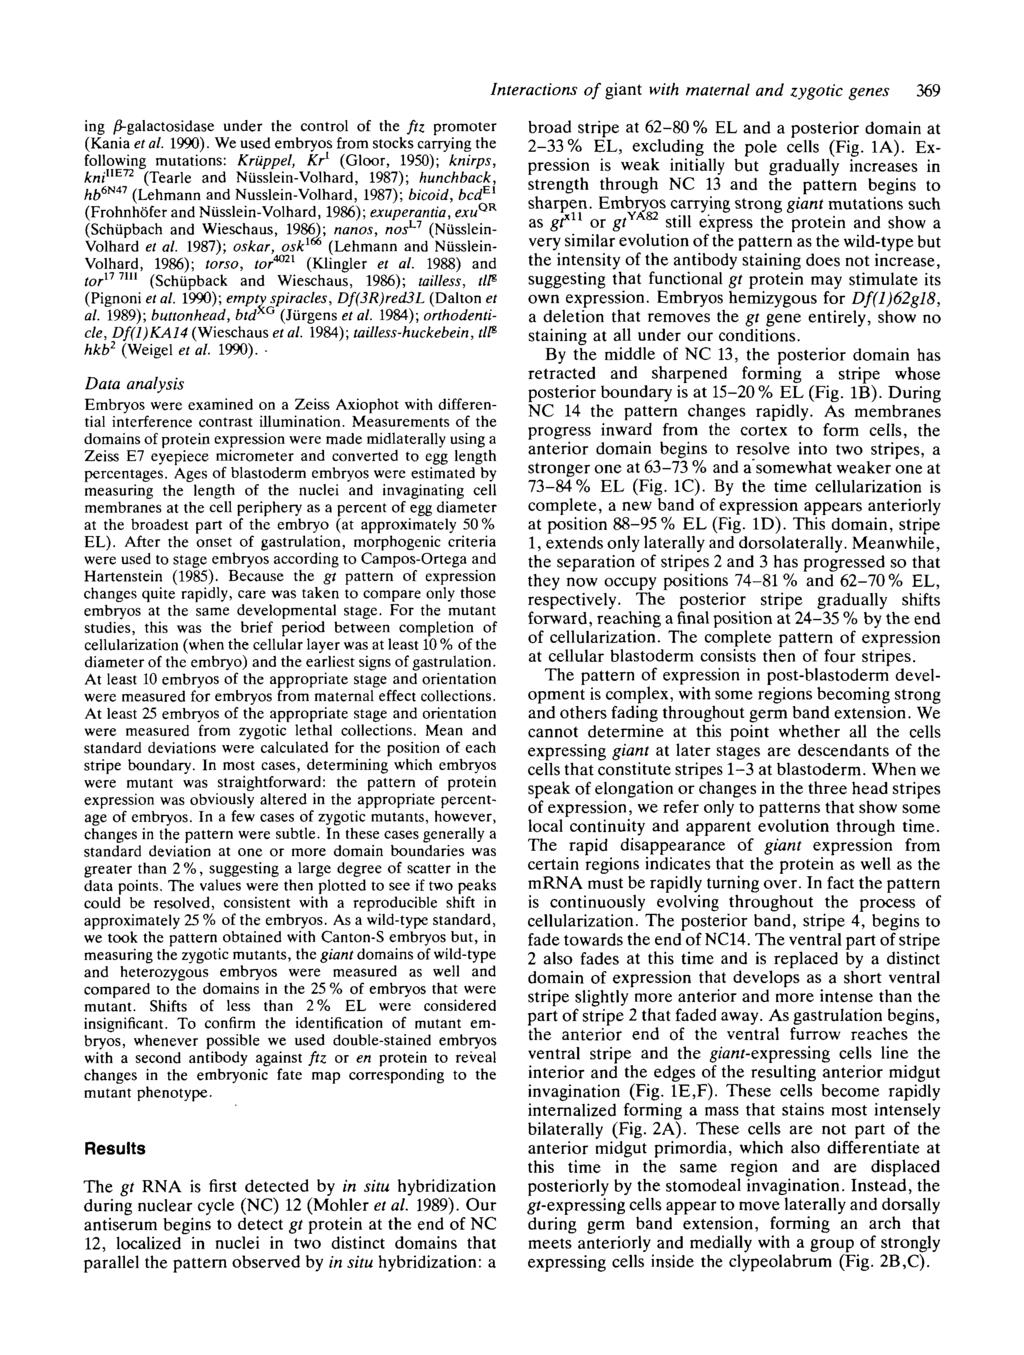 Interactions of giant with maternal and zygotic genes 369 ing /S-galactosidase under the control of the ftz promoter (Kania et al. 1990).